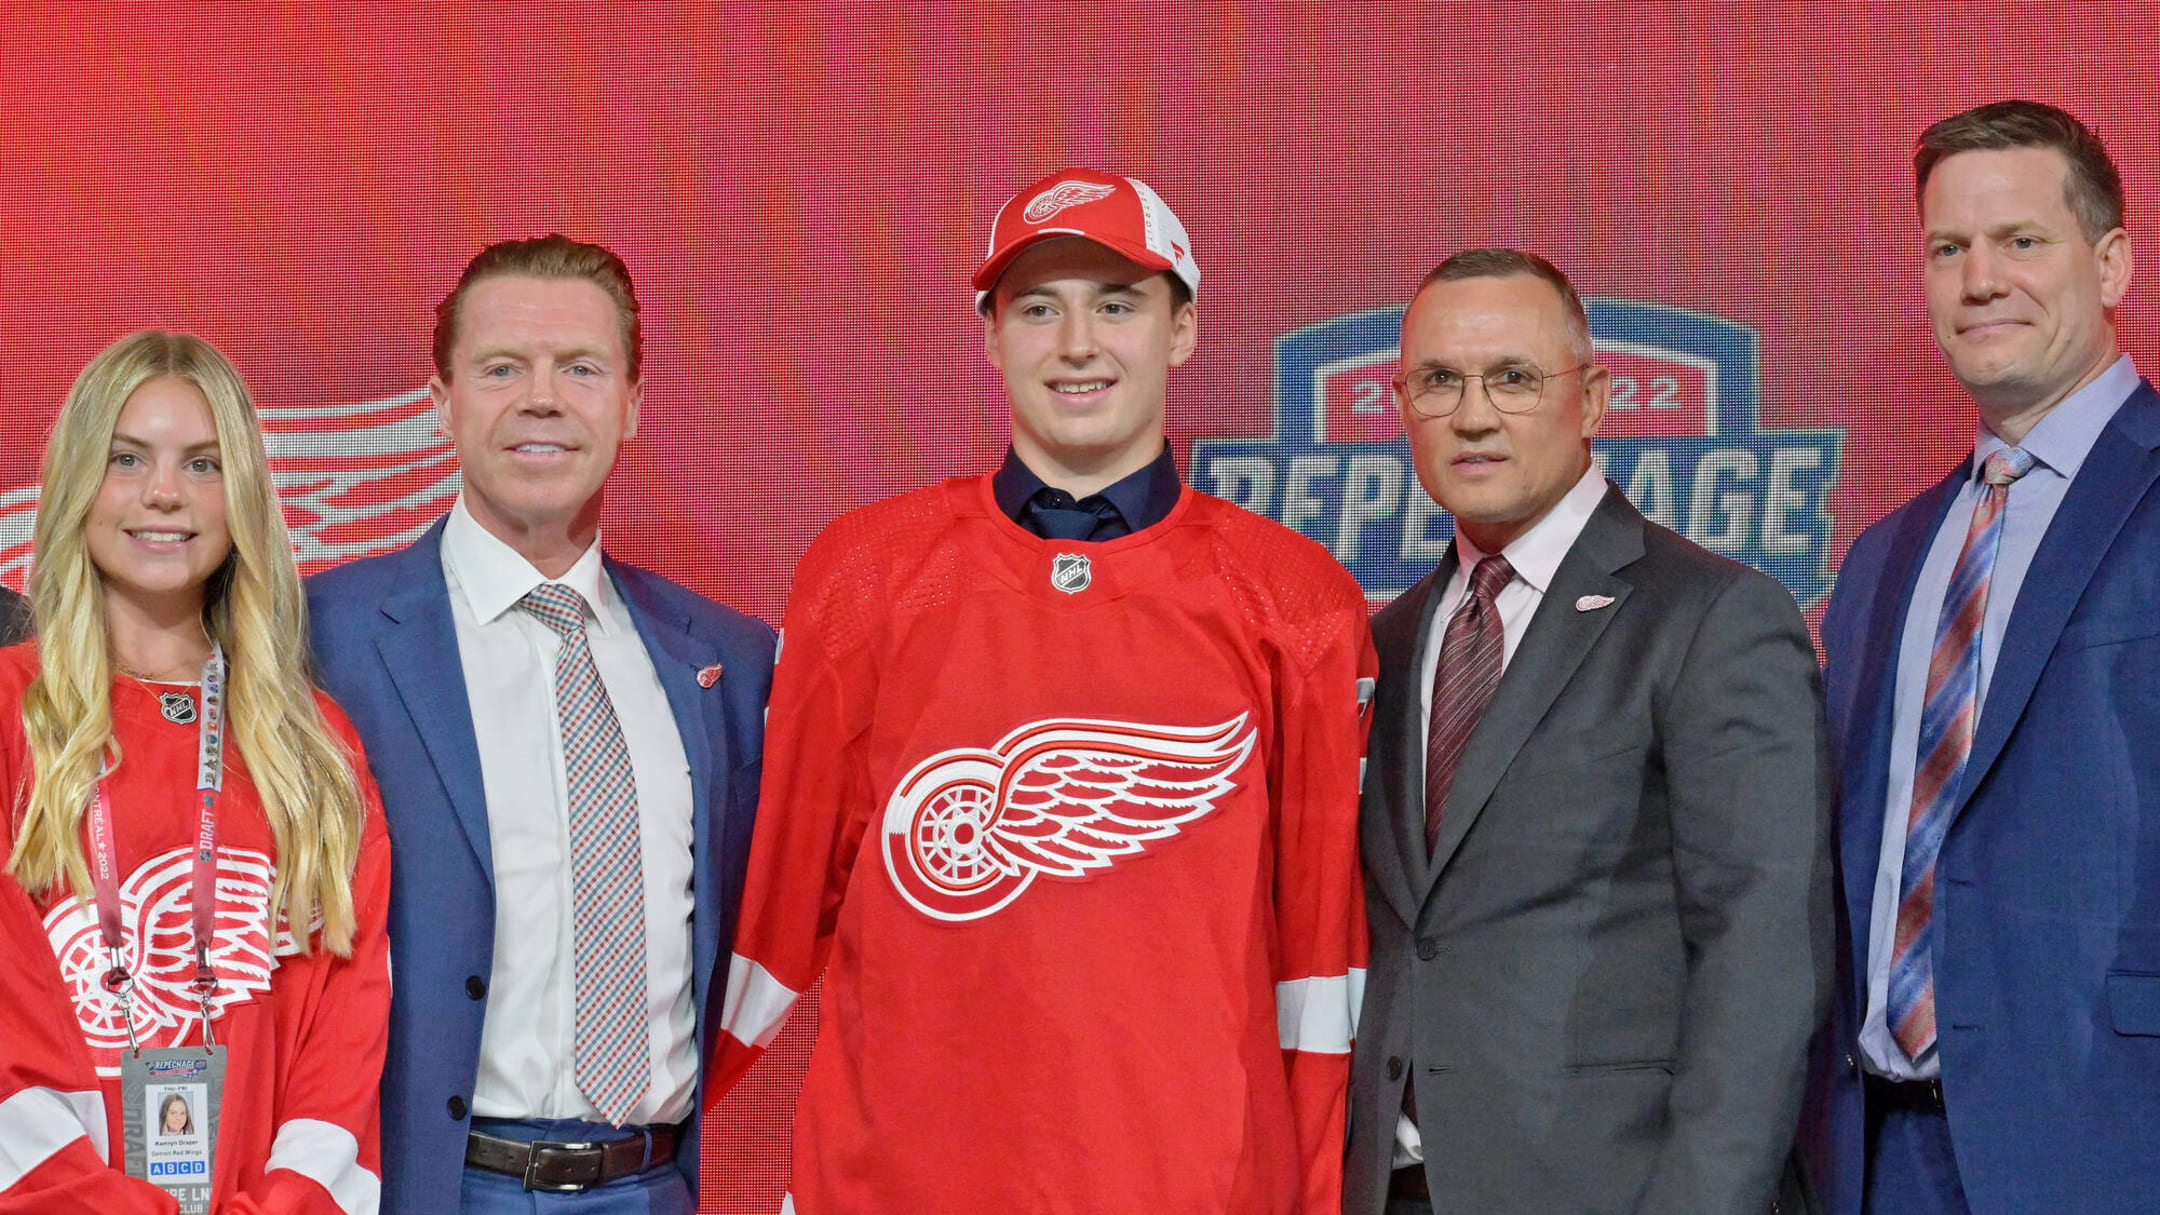 Marco Kasper will make his NHL debut - Detroit Red Wings